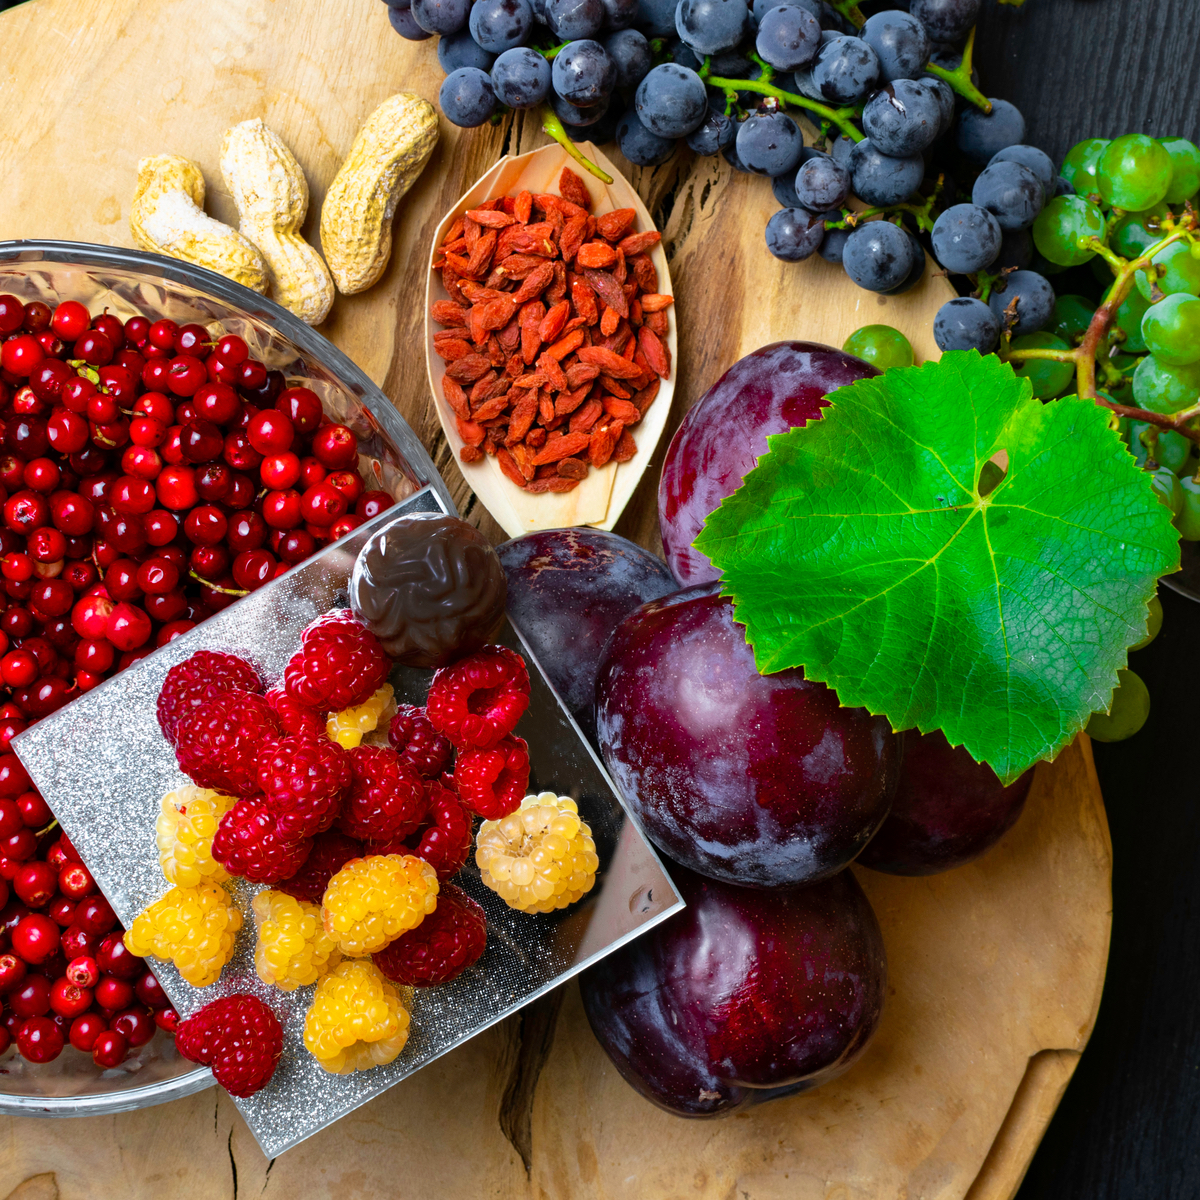 Resveratrol Benefits That Can Improve Your Health